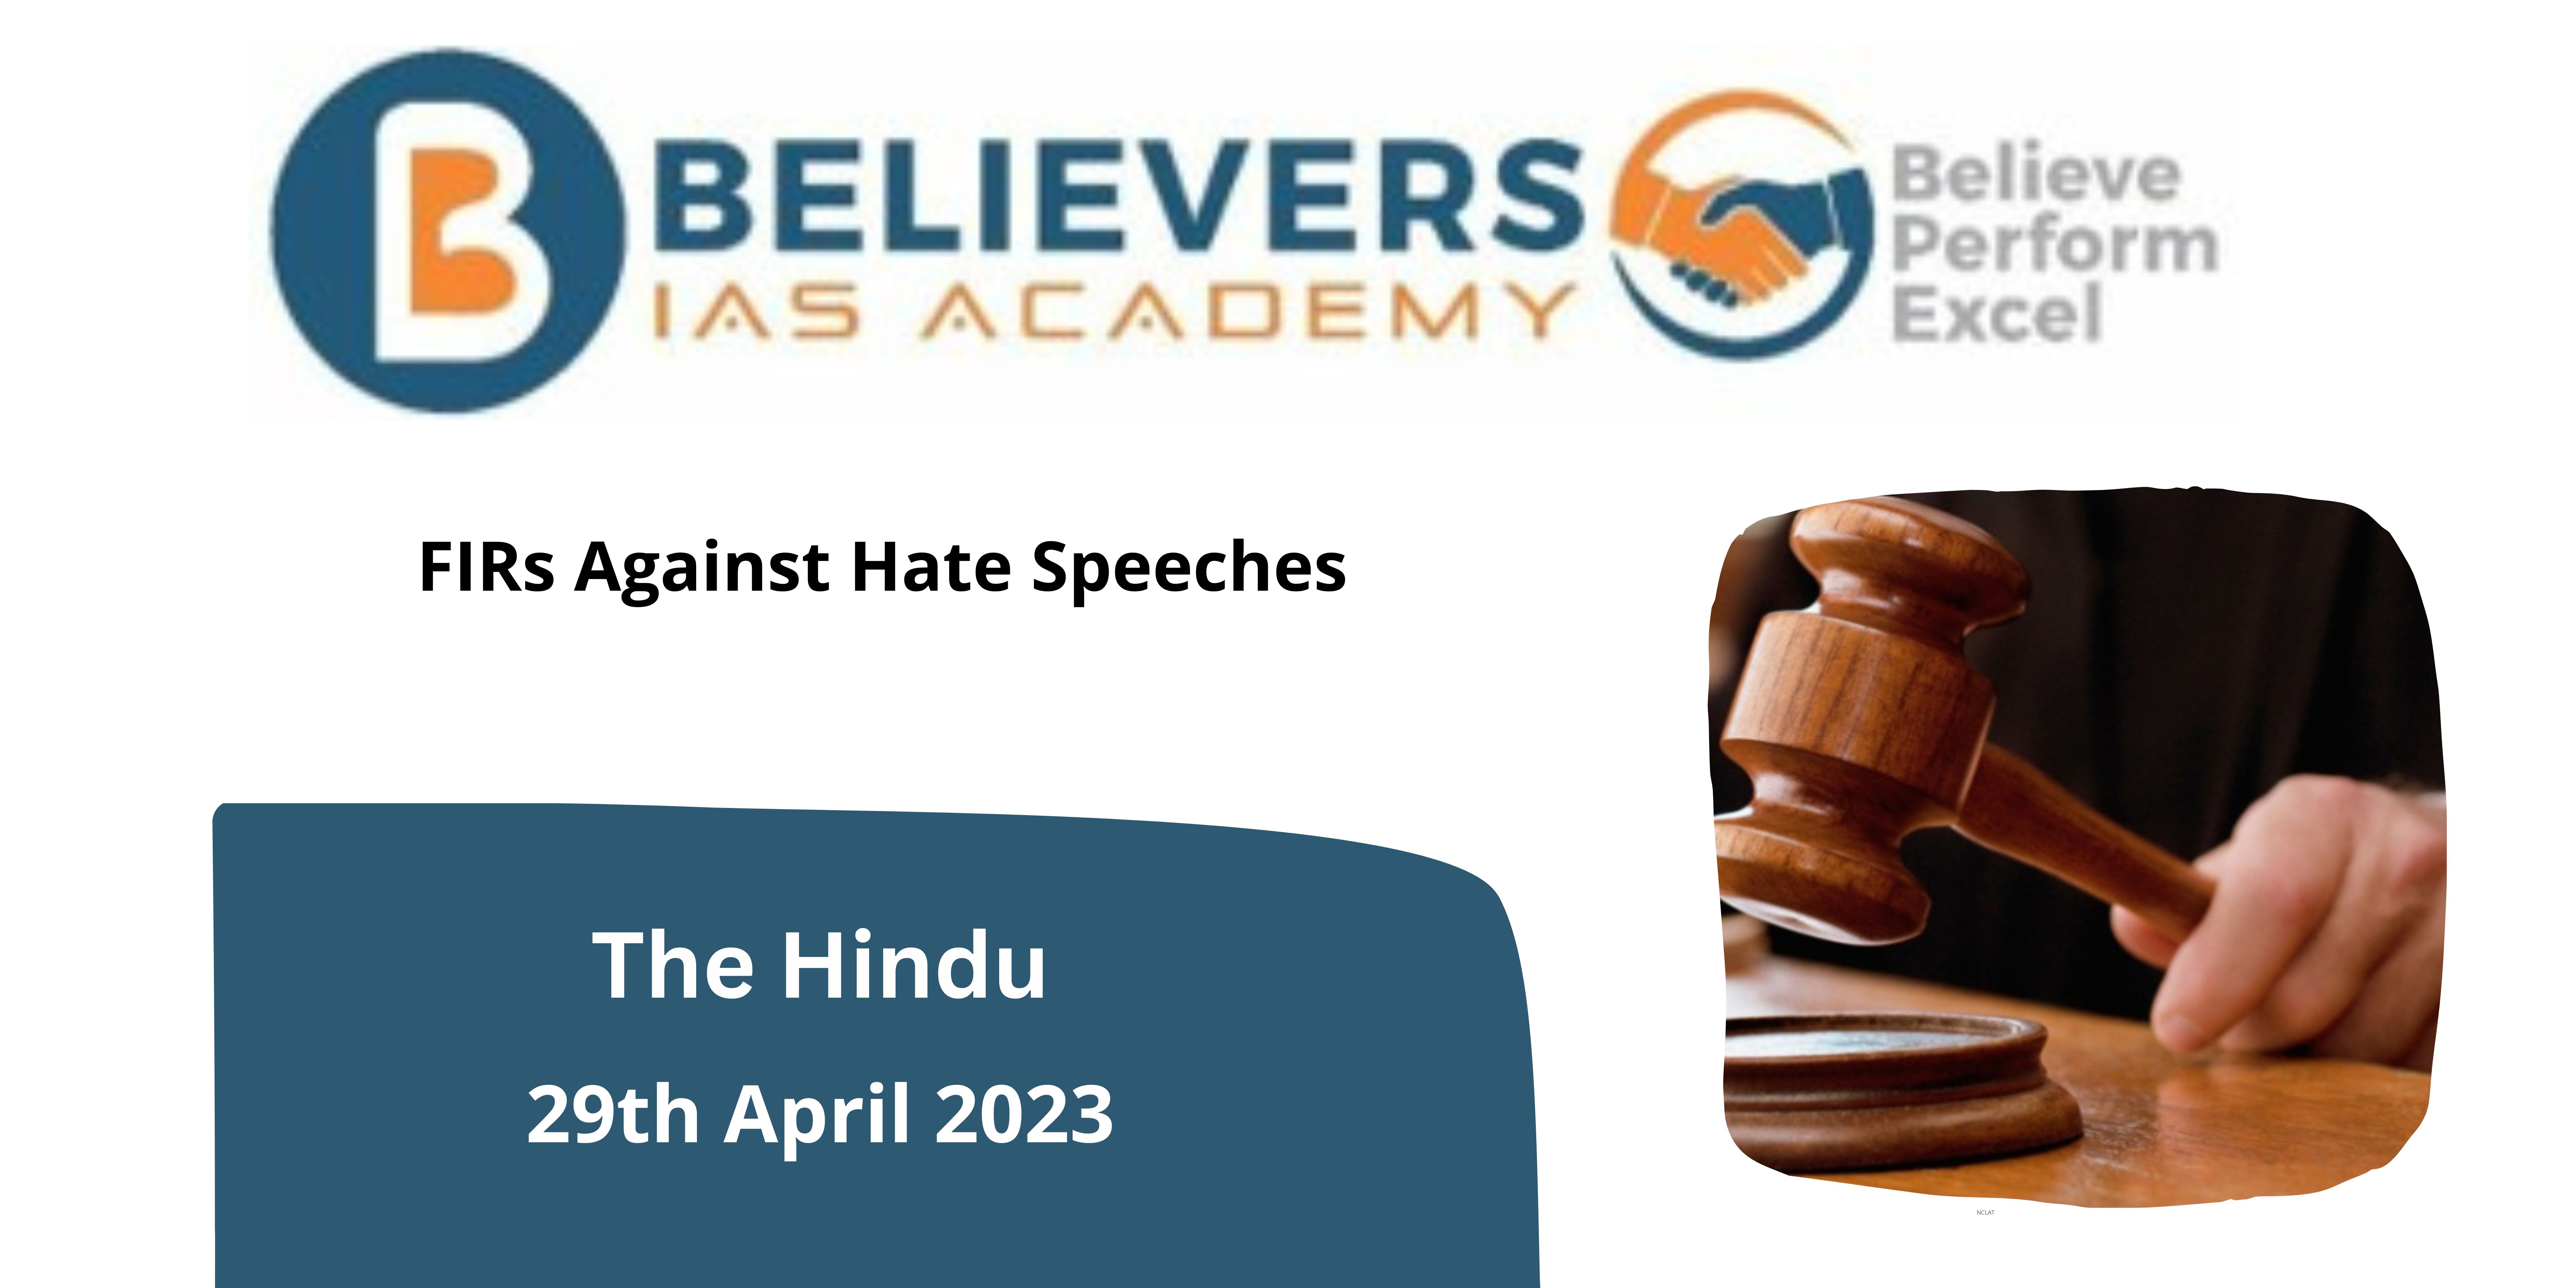 FIRs Against Hate Speeches